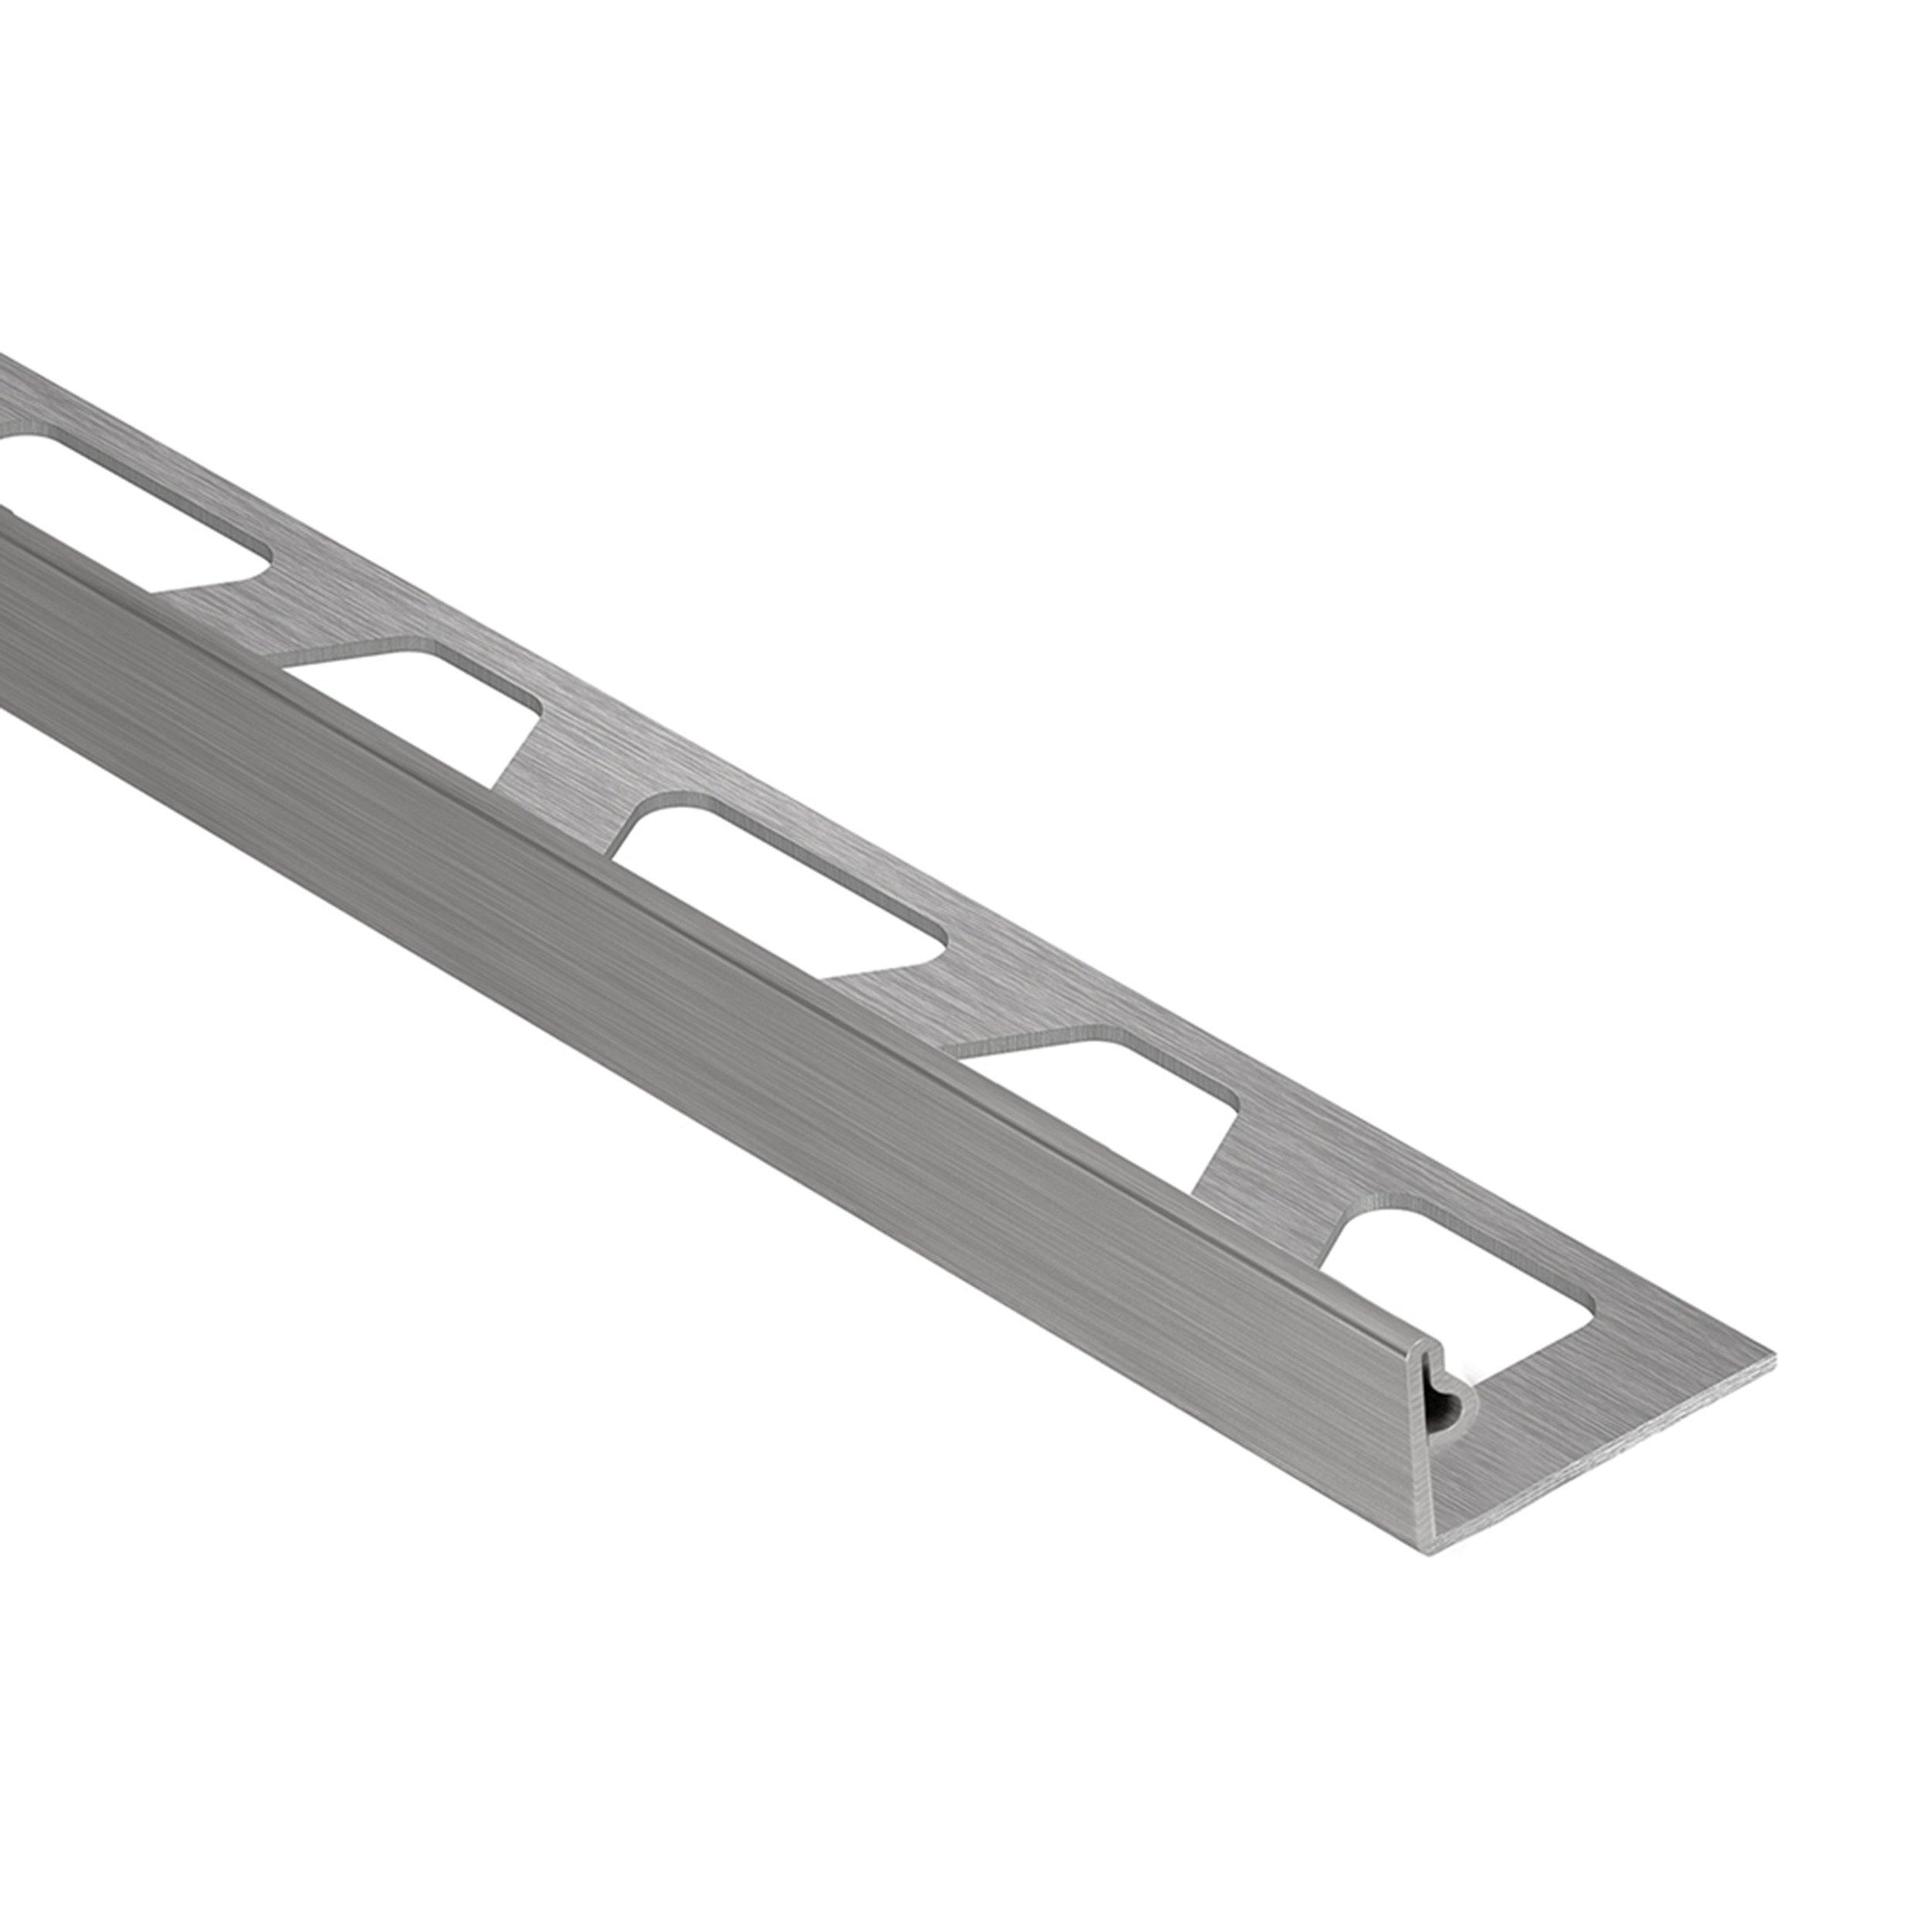 Schluter Jolly Edge Trim 7/16in. Aluminum Brushed Stainless Steel